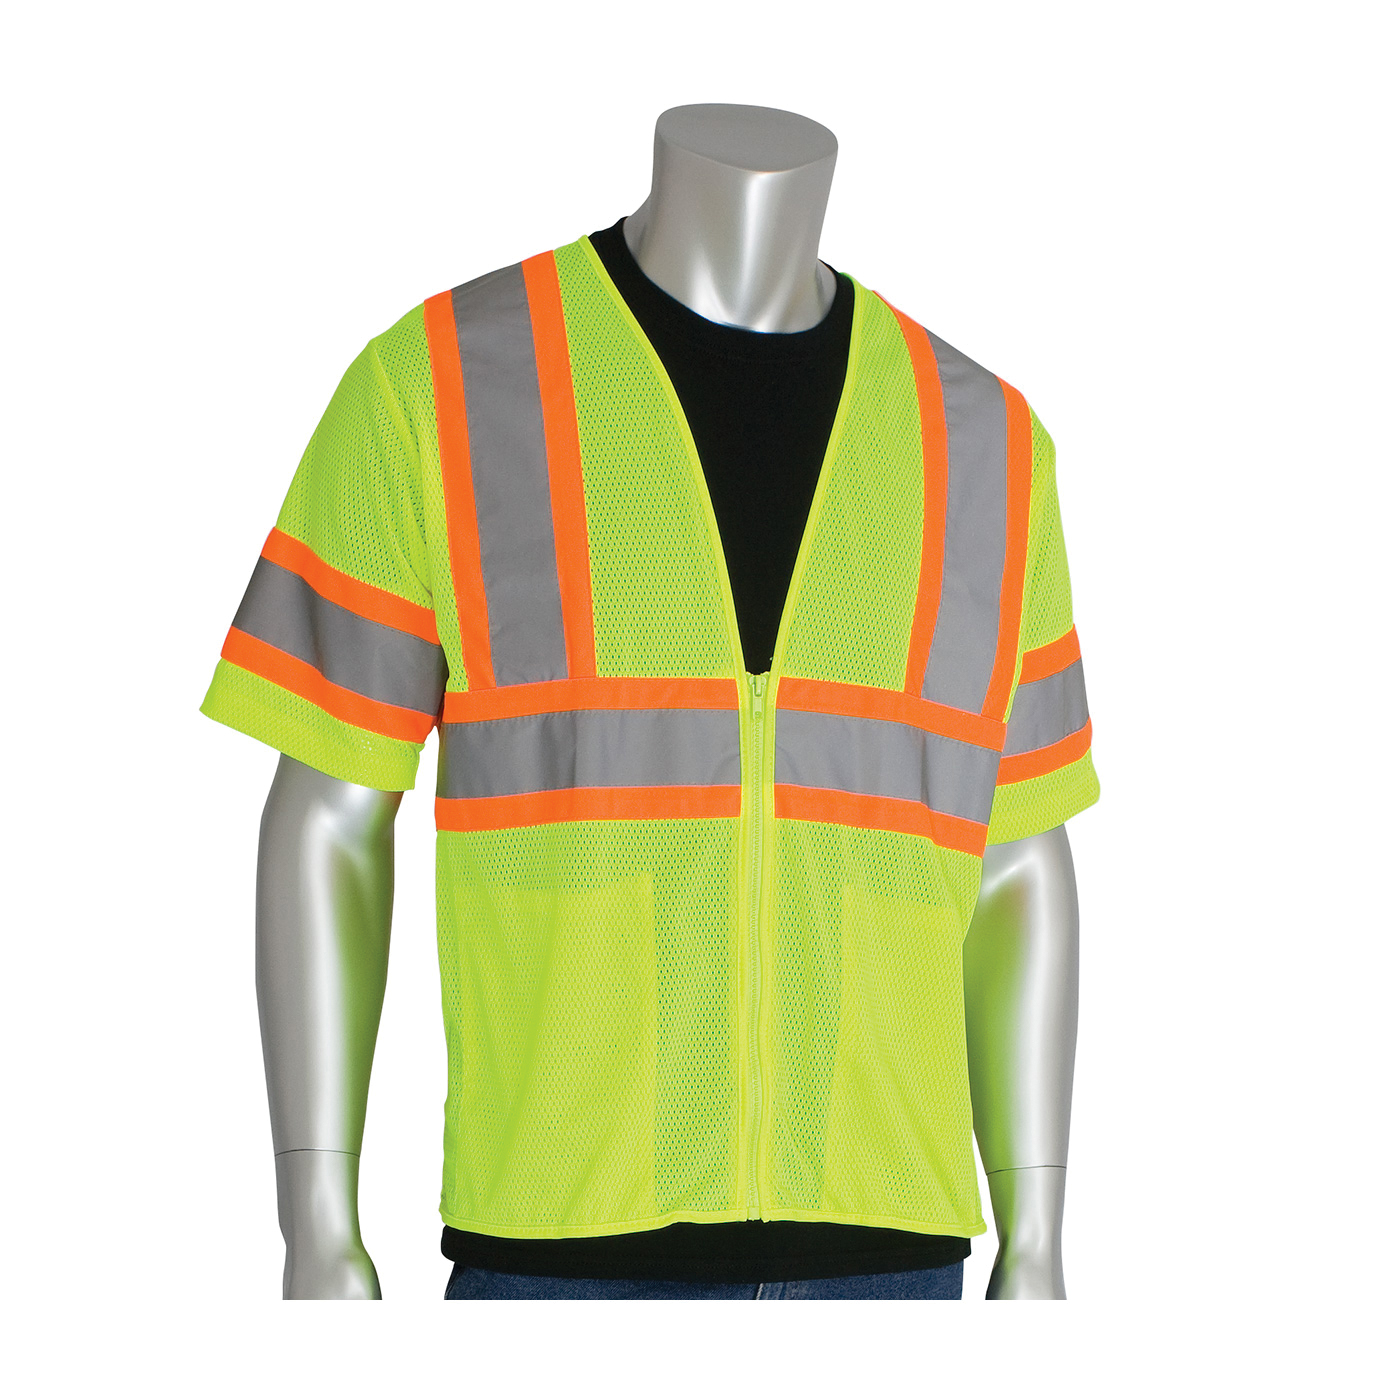 PIP® 303-HSVPLY- 2-Tone Safety Vest, Hi-Viz Lime Yellow, Polyester Mesh, Zipper Closure, 2 Pockets, ANSI Class: Class 3, Specifications Met: ANSI 107 Type R